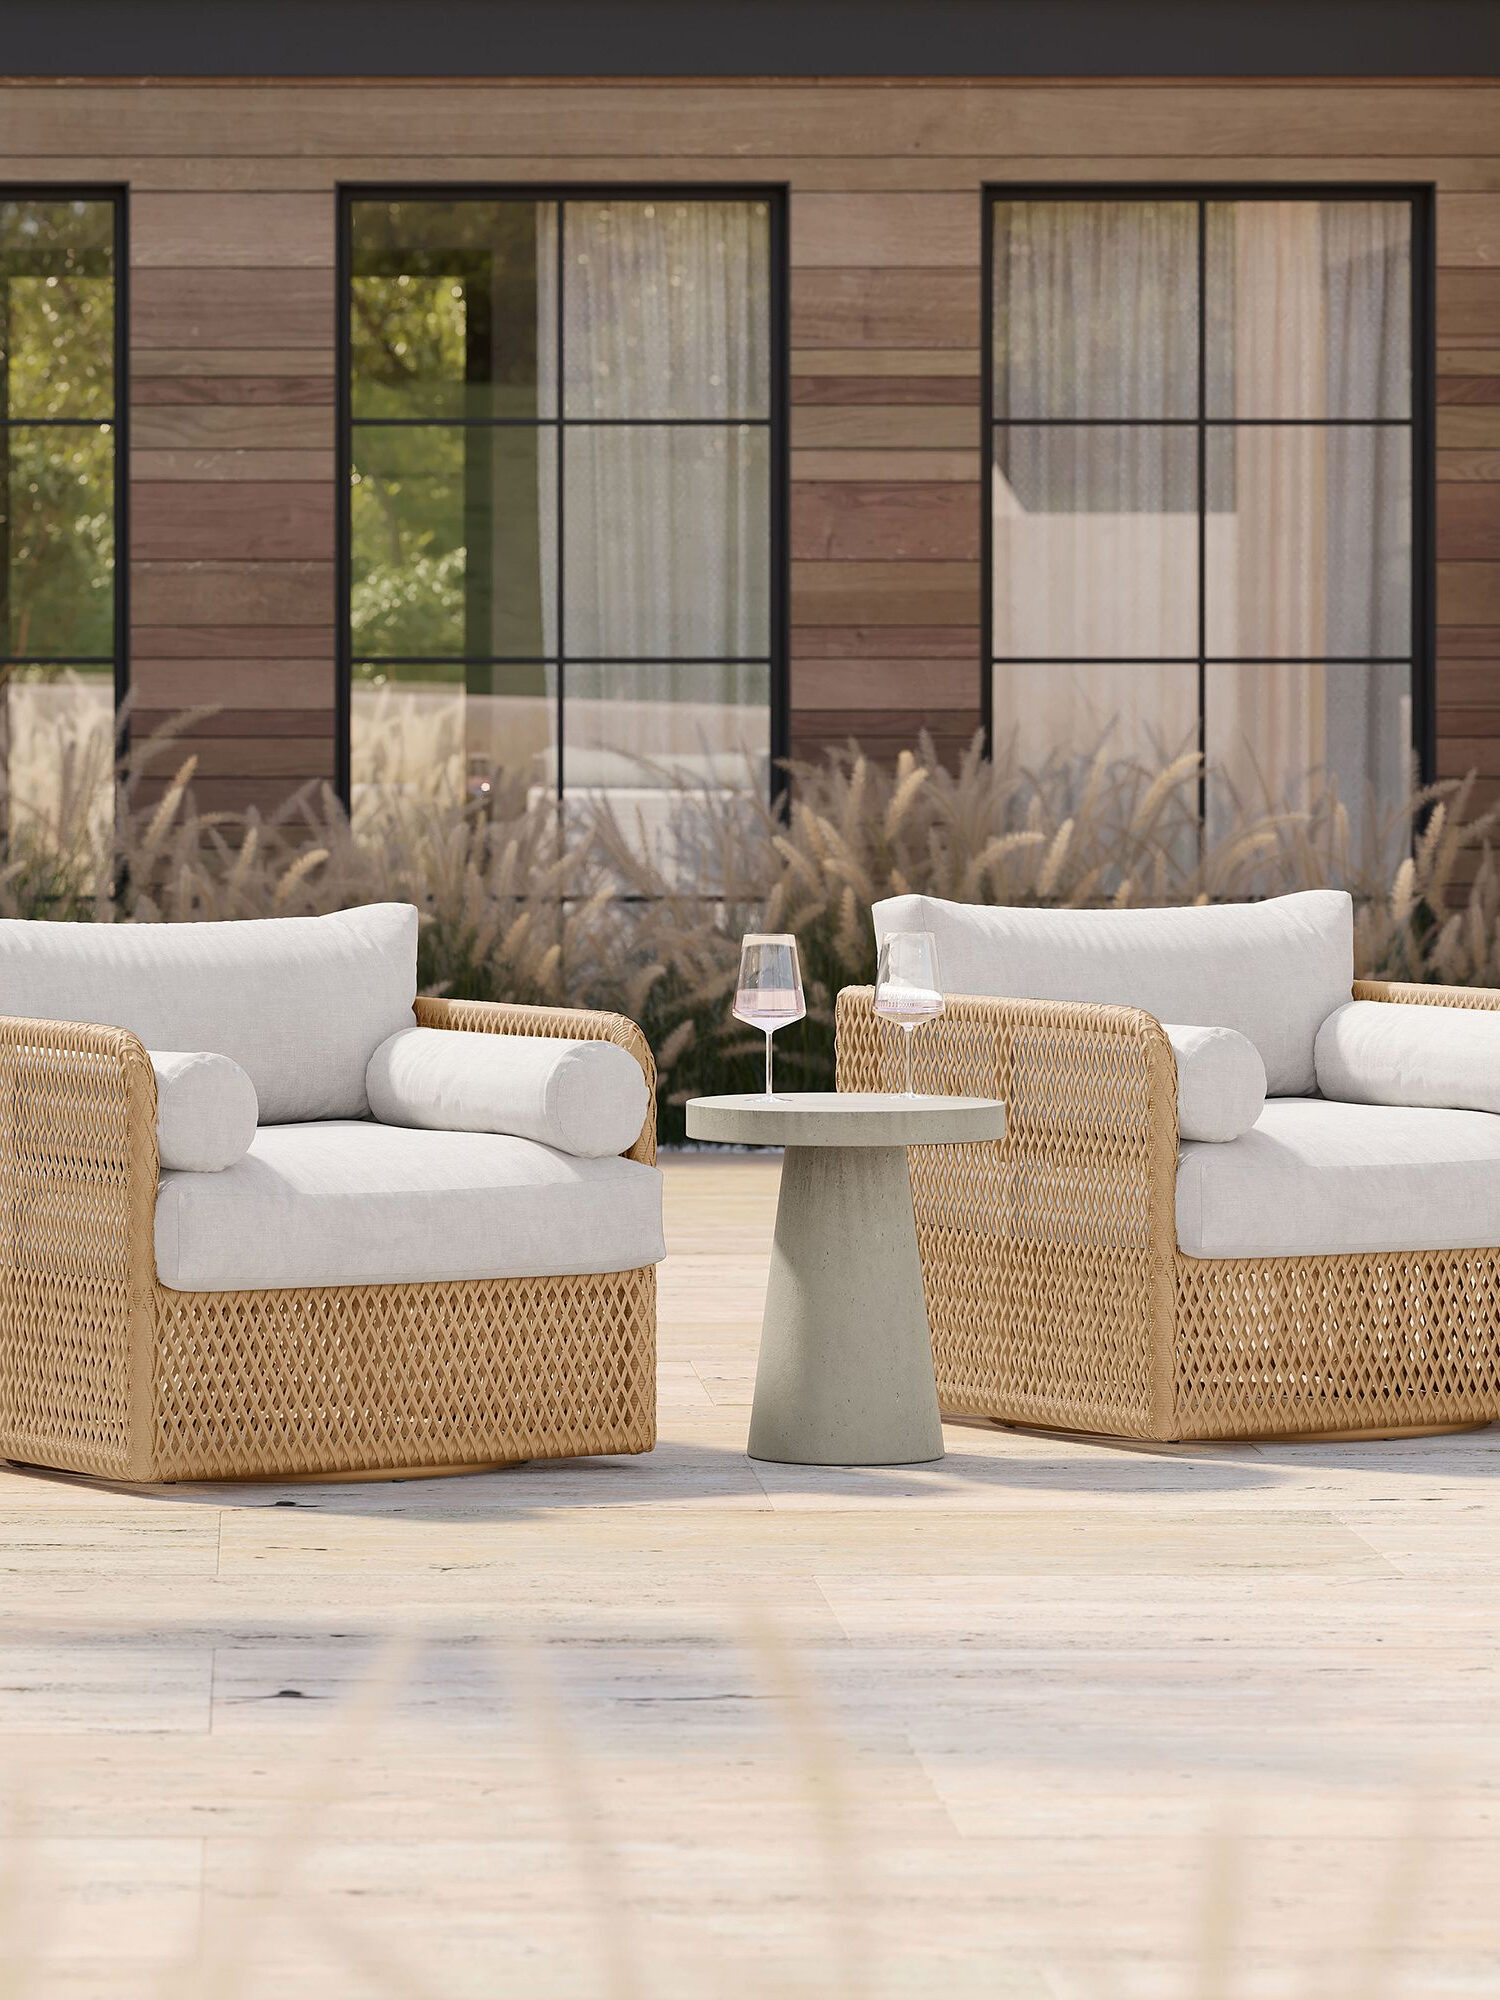 Two wicker lounge chairs on a patio with a glass of wine.